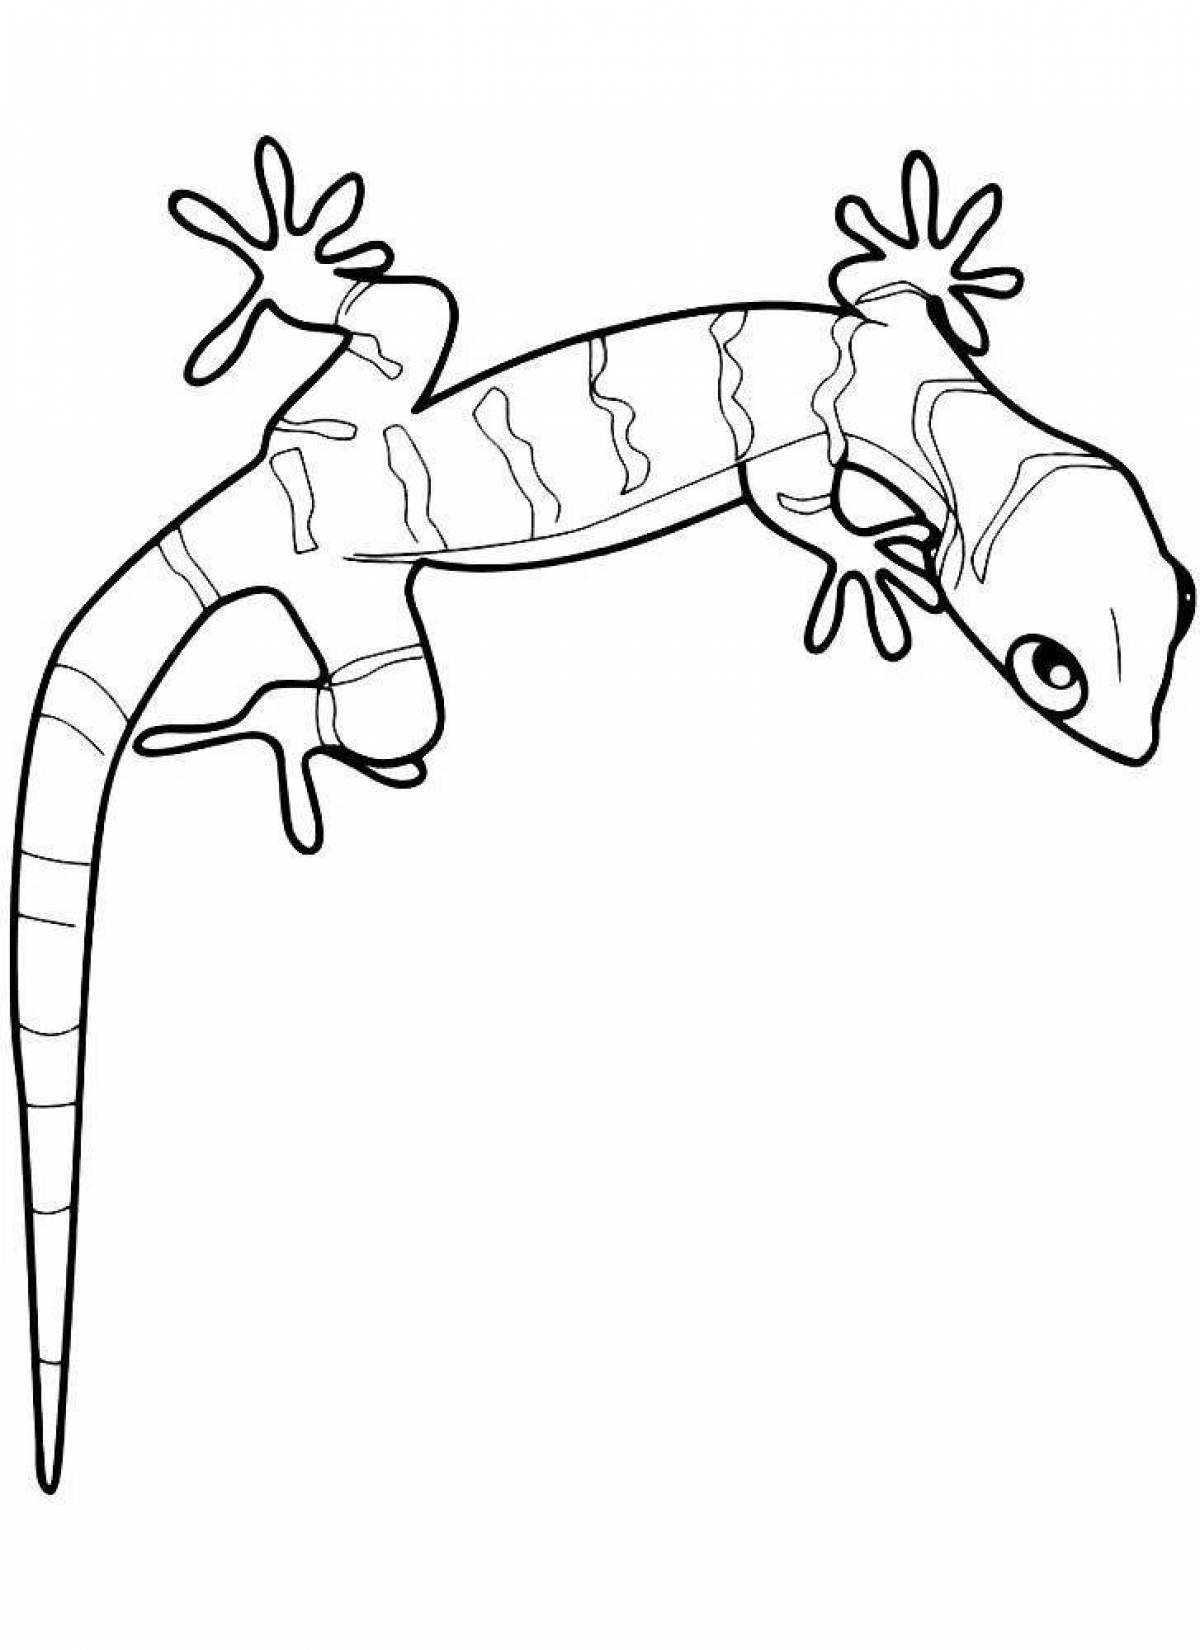 Shiny gecko coloring page